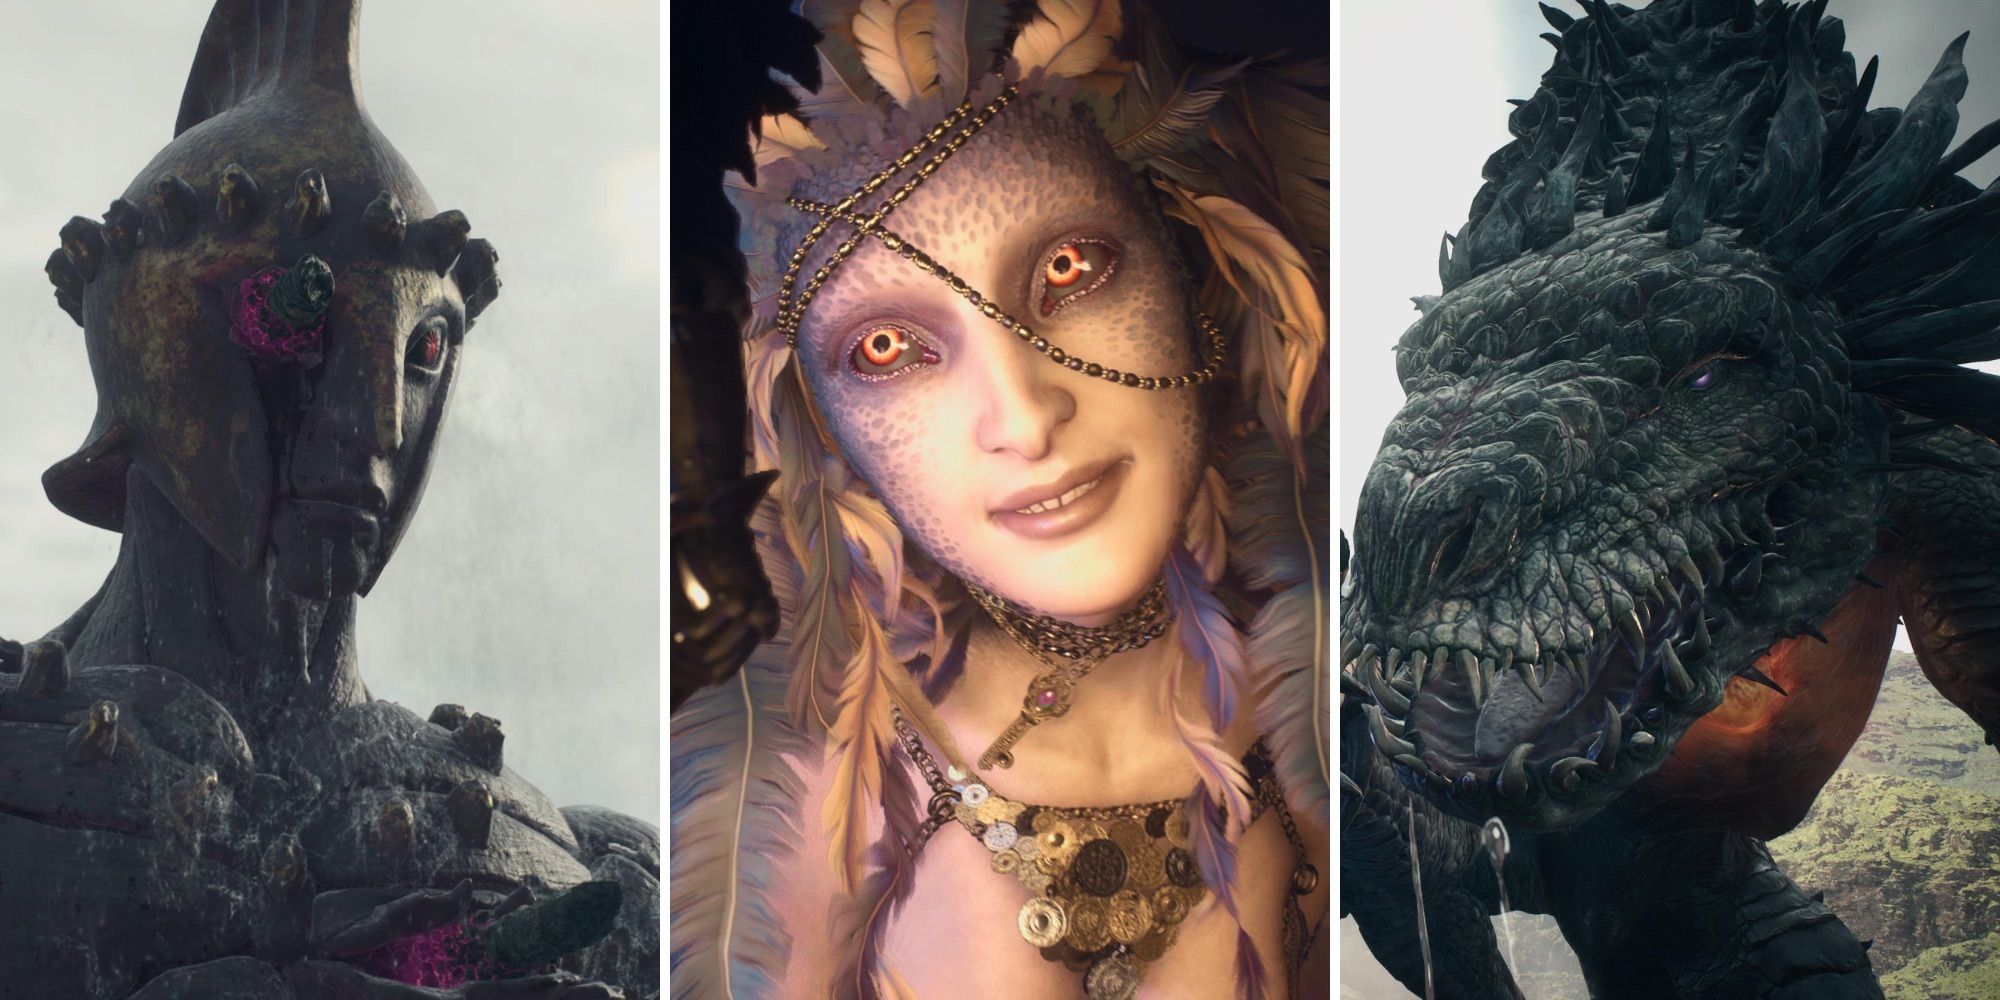 A grid showing the monsters: Talos, the Sphinx, and a Drake in Dragon’s Dogma 2